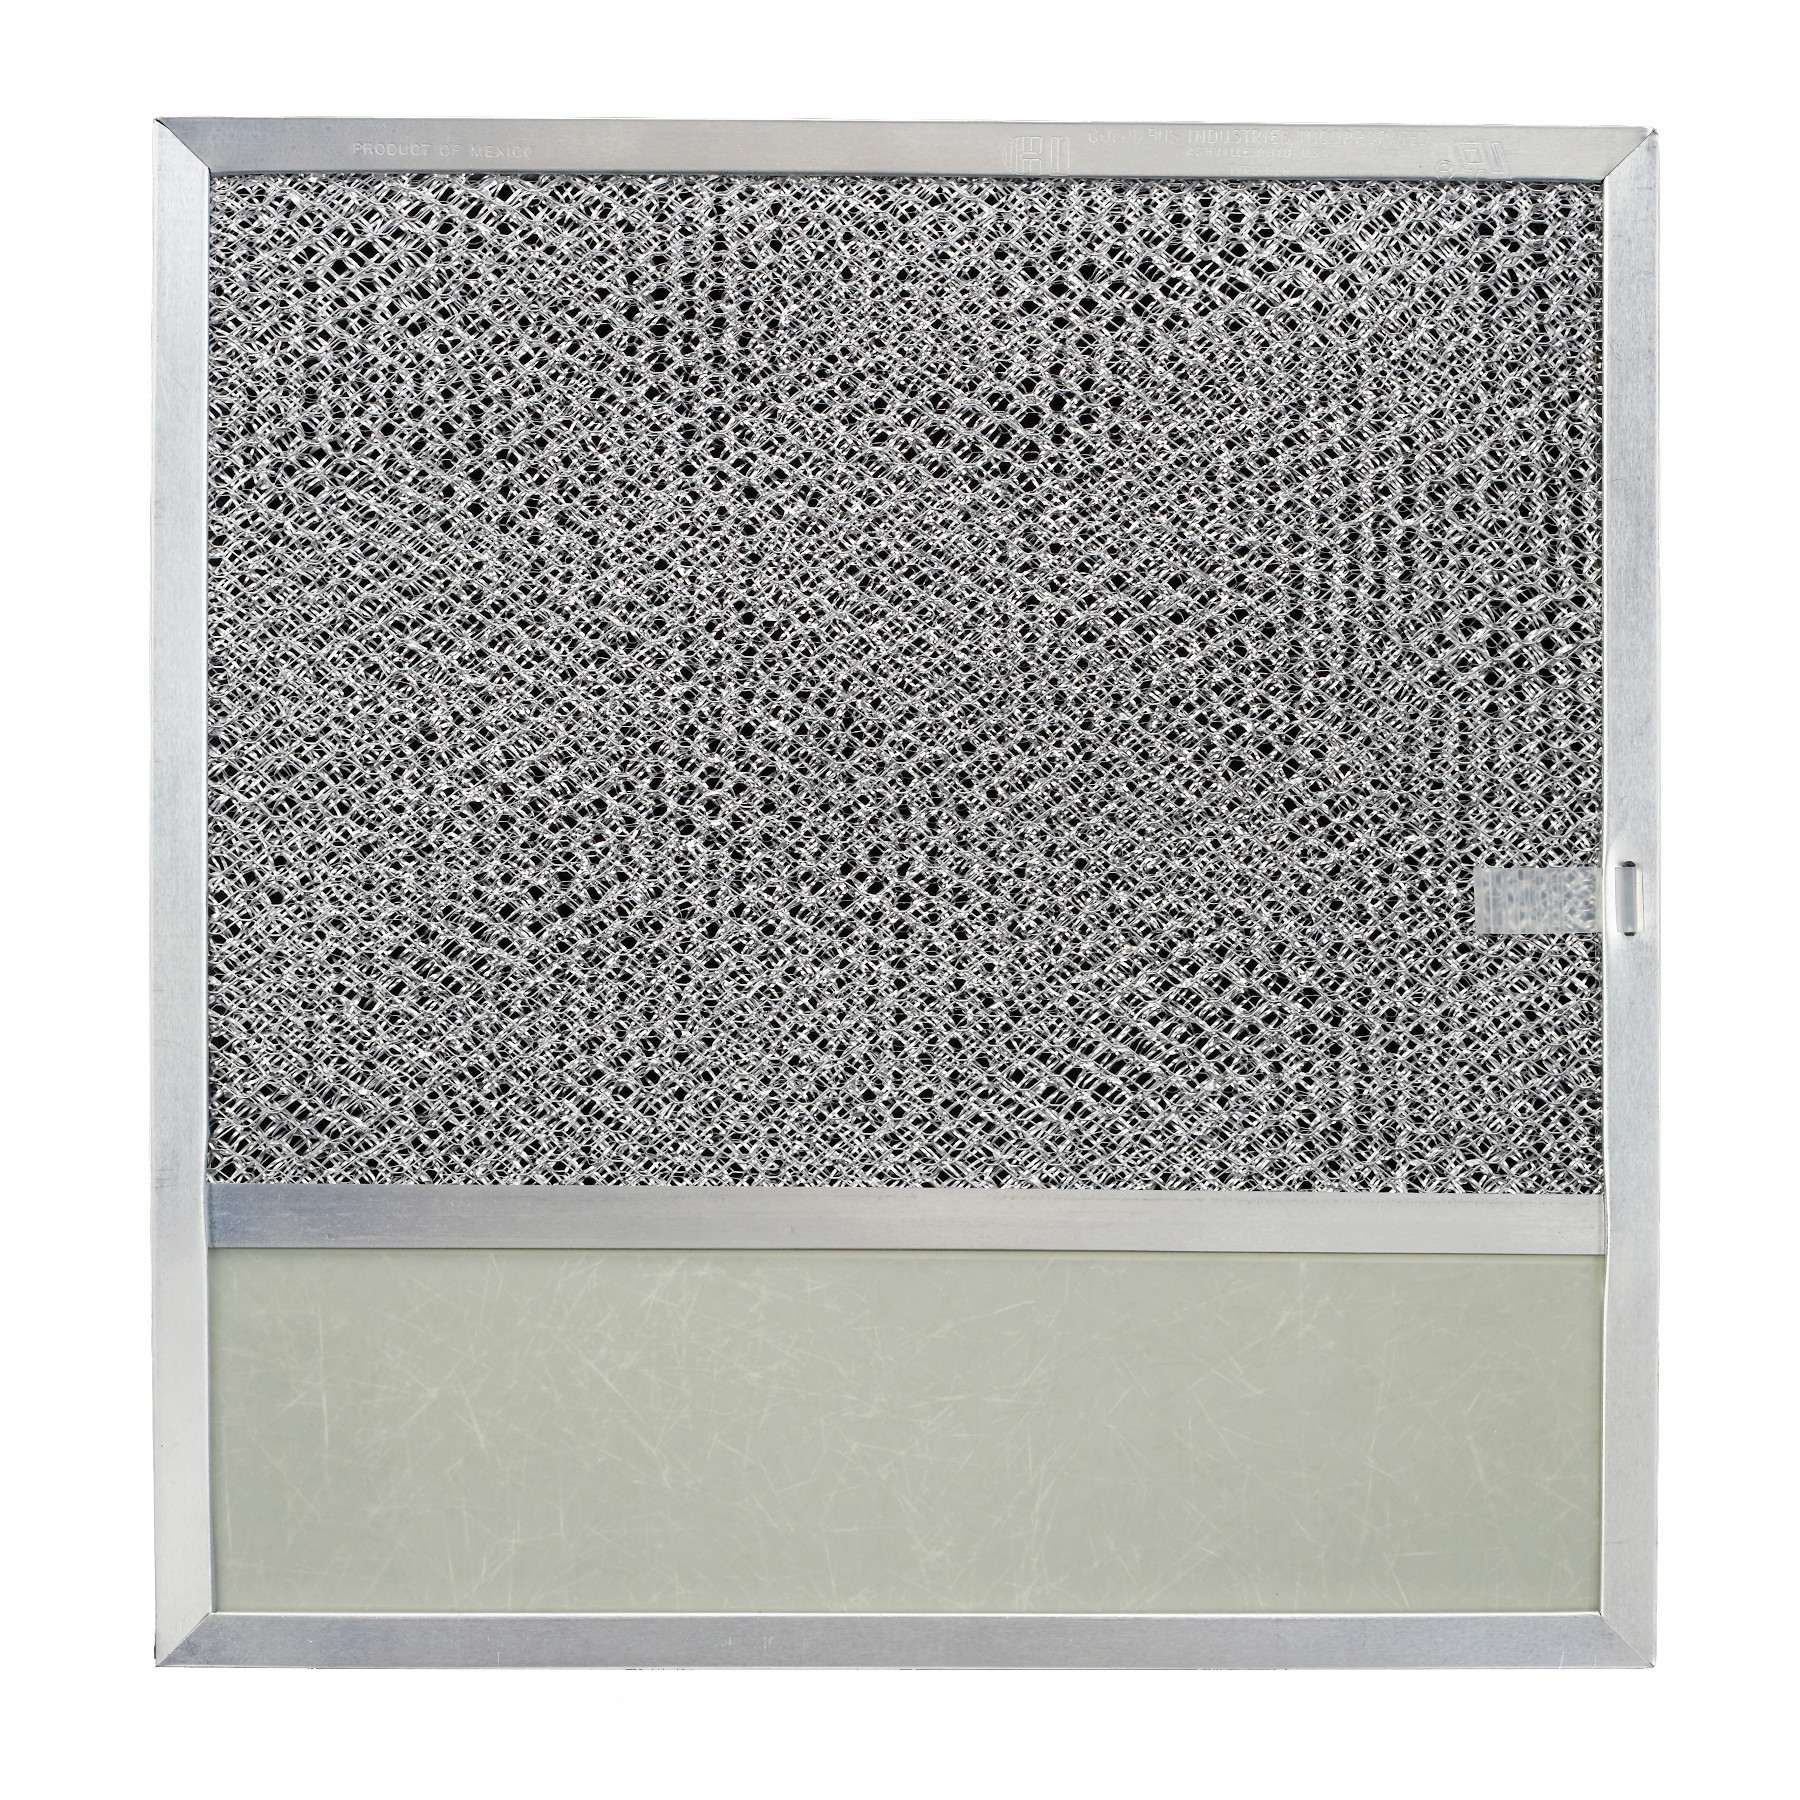 Aluminum Filter with Light Lens, 11-3/4-Inch x 13-7/16-Inch